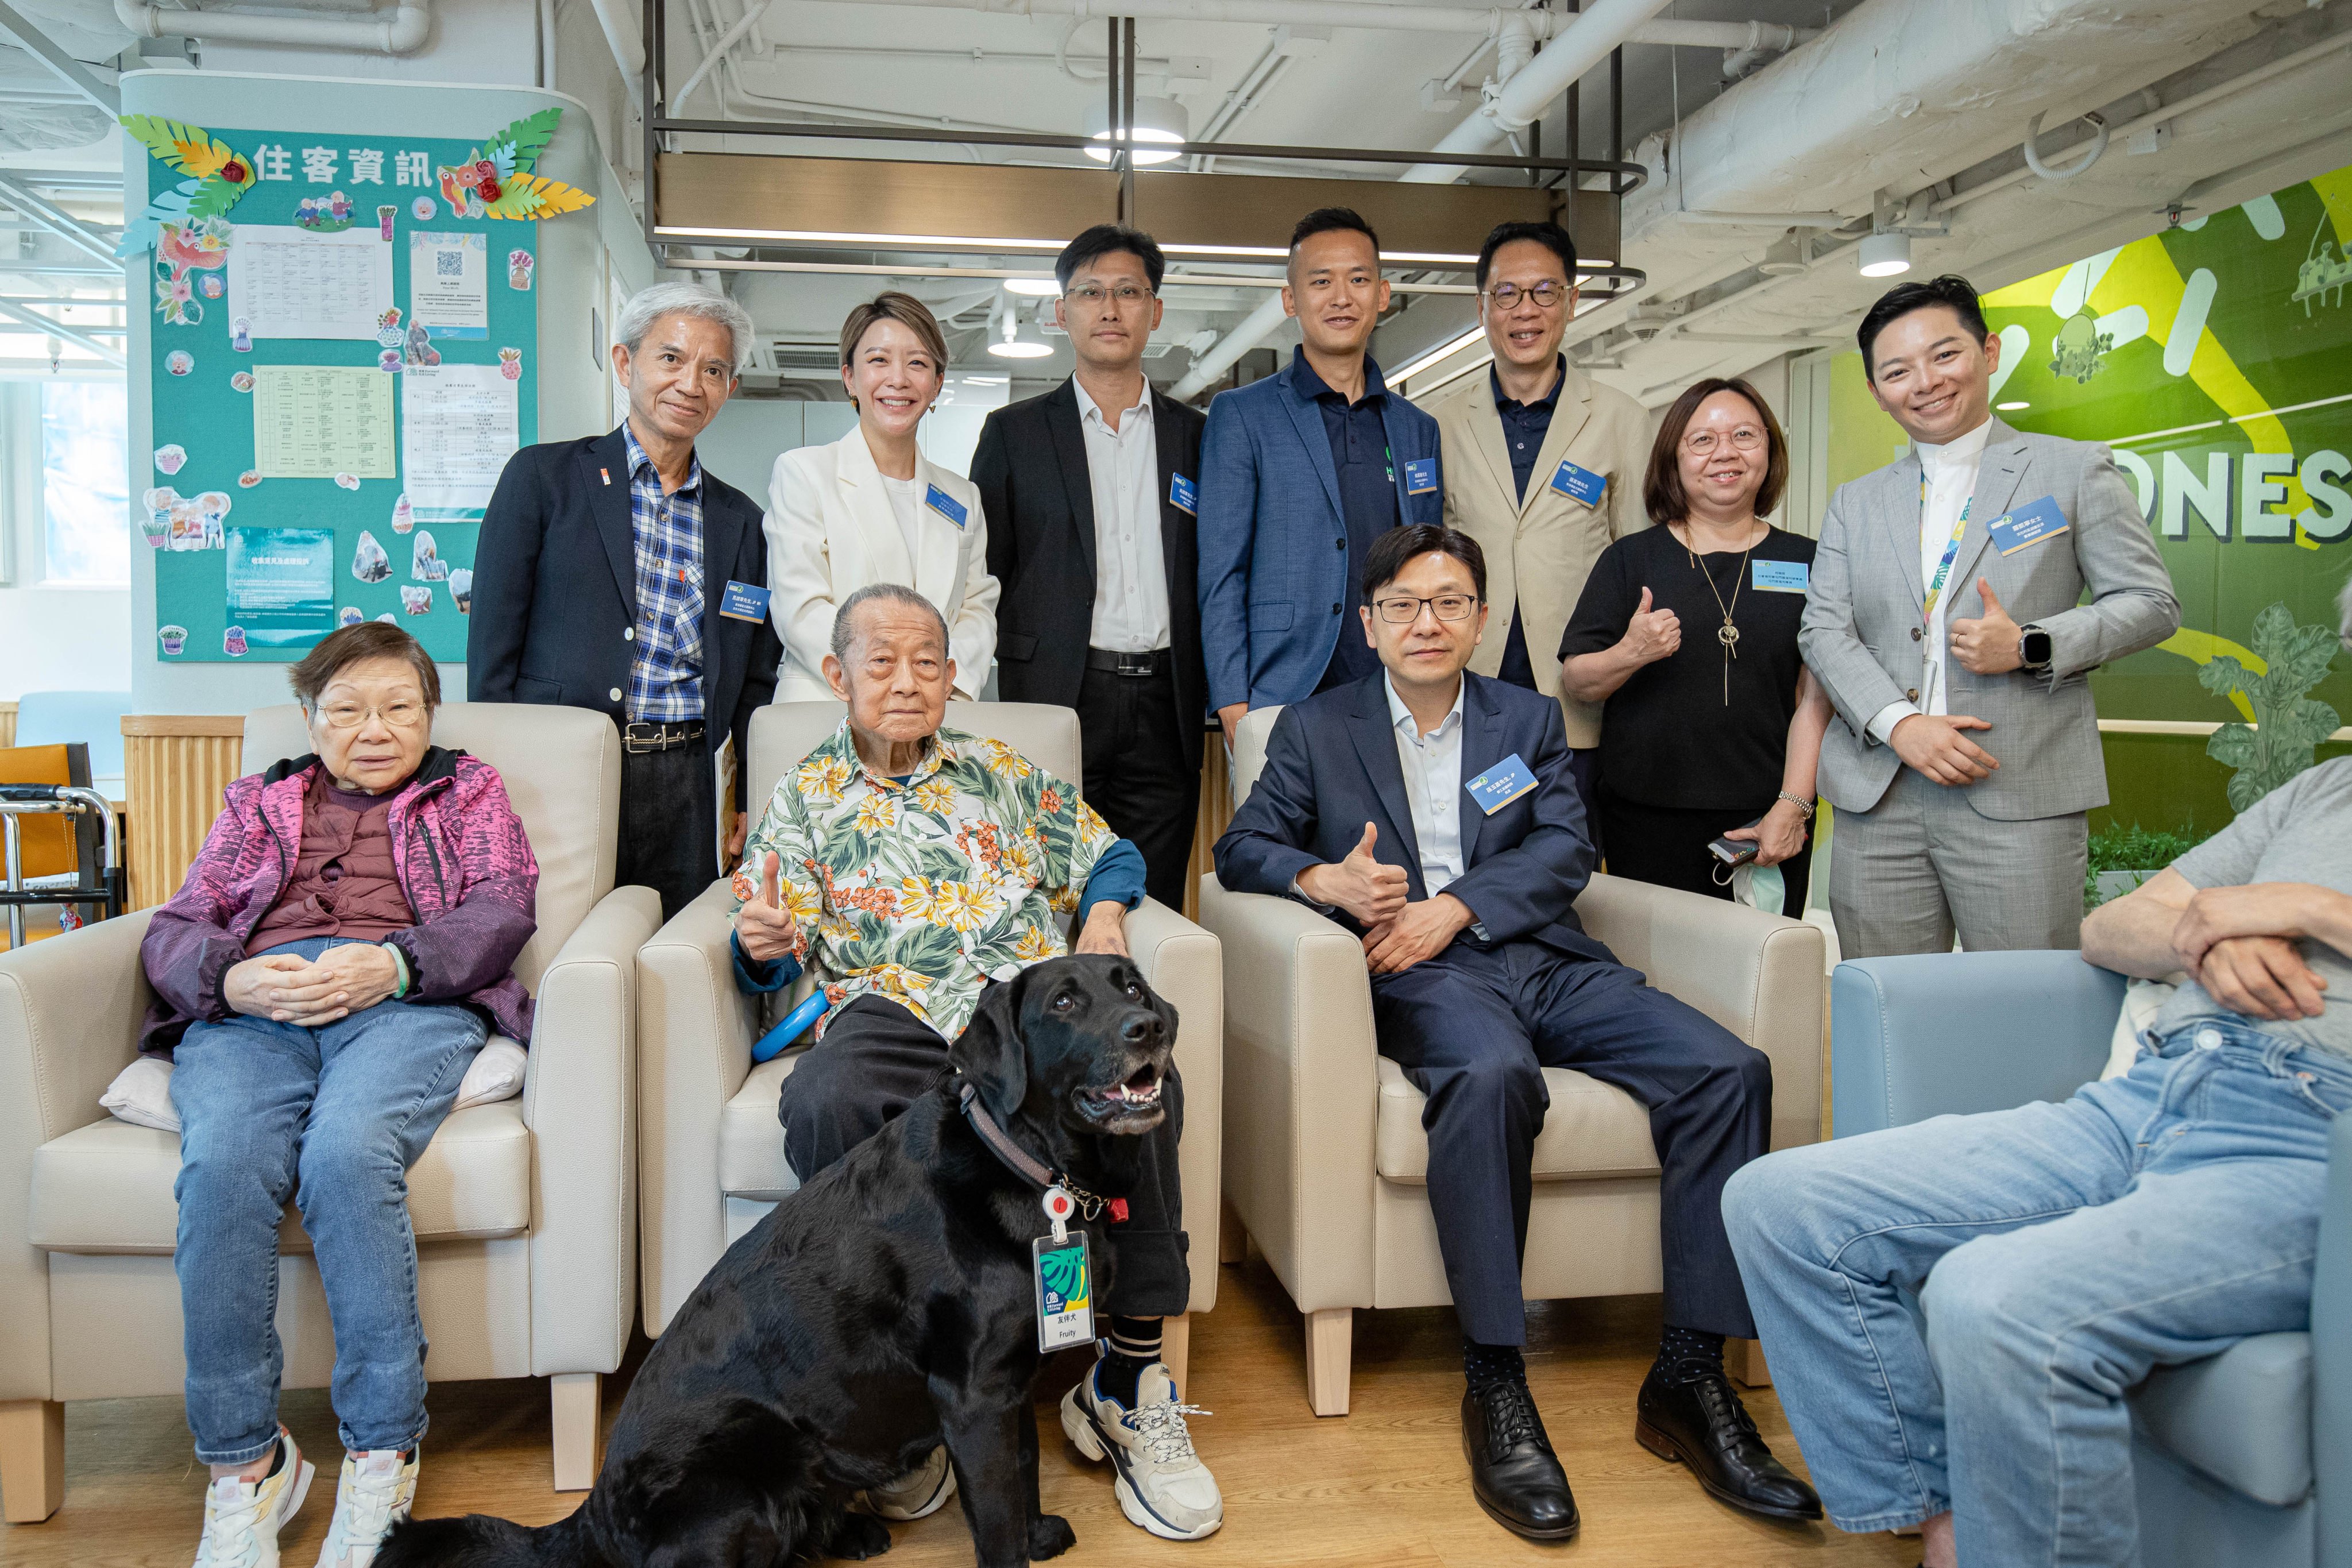 Fruity the dog at the elderly facility in Tuen Mun where she lives, along with (second from lower left) Johnson Ho, resident of the home; (third from lower left) Secretary for Labour and Welfare Chris Sun, and (third from upper right) David Cheung, CEO of HKSEDS. Photo: Handout
